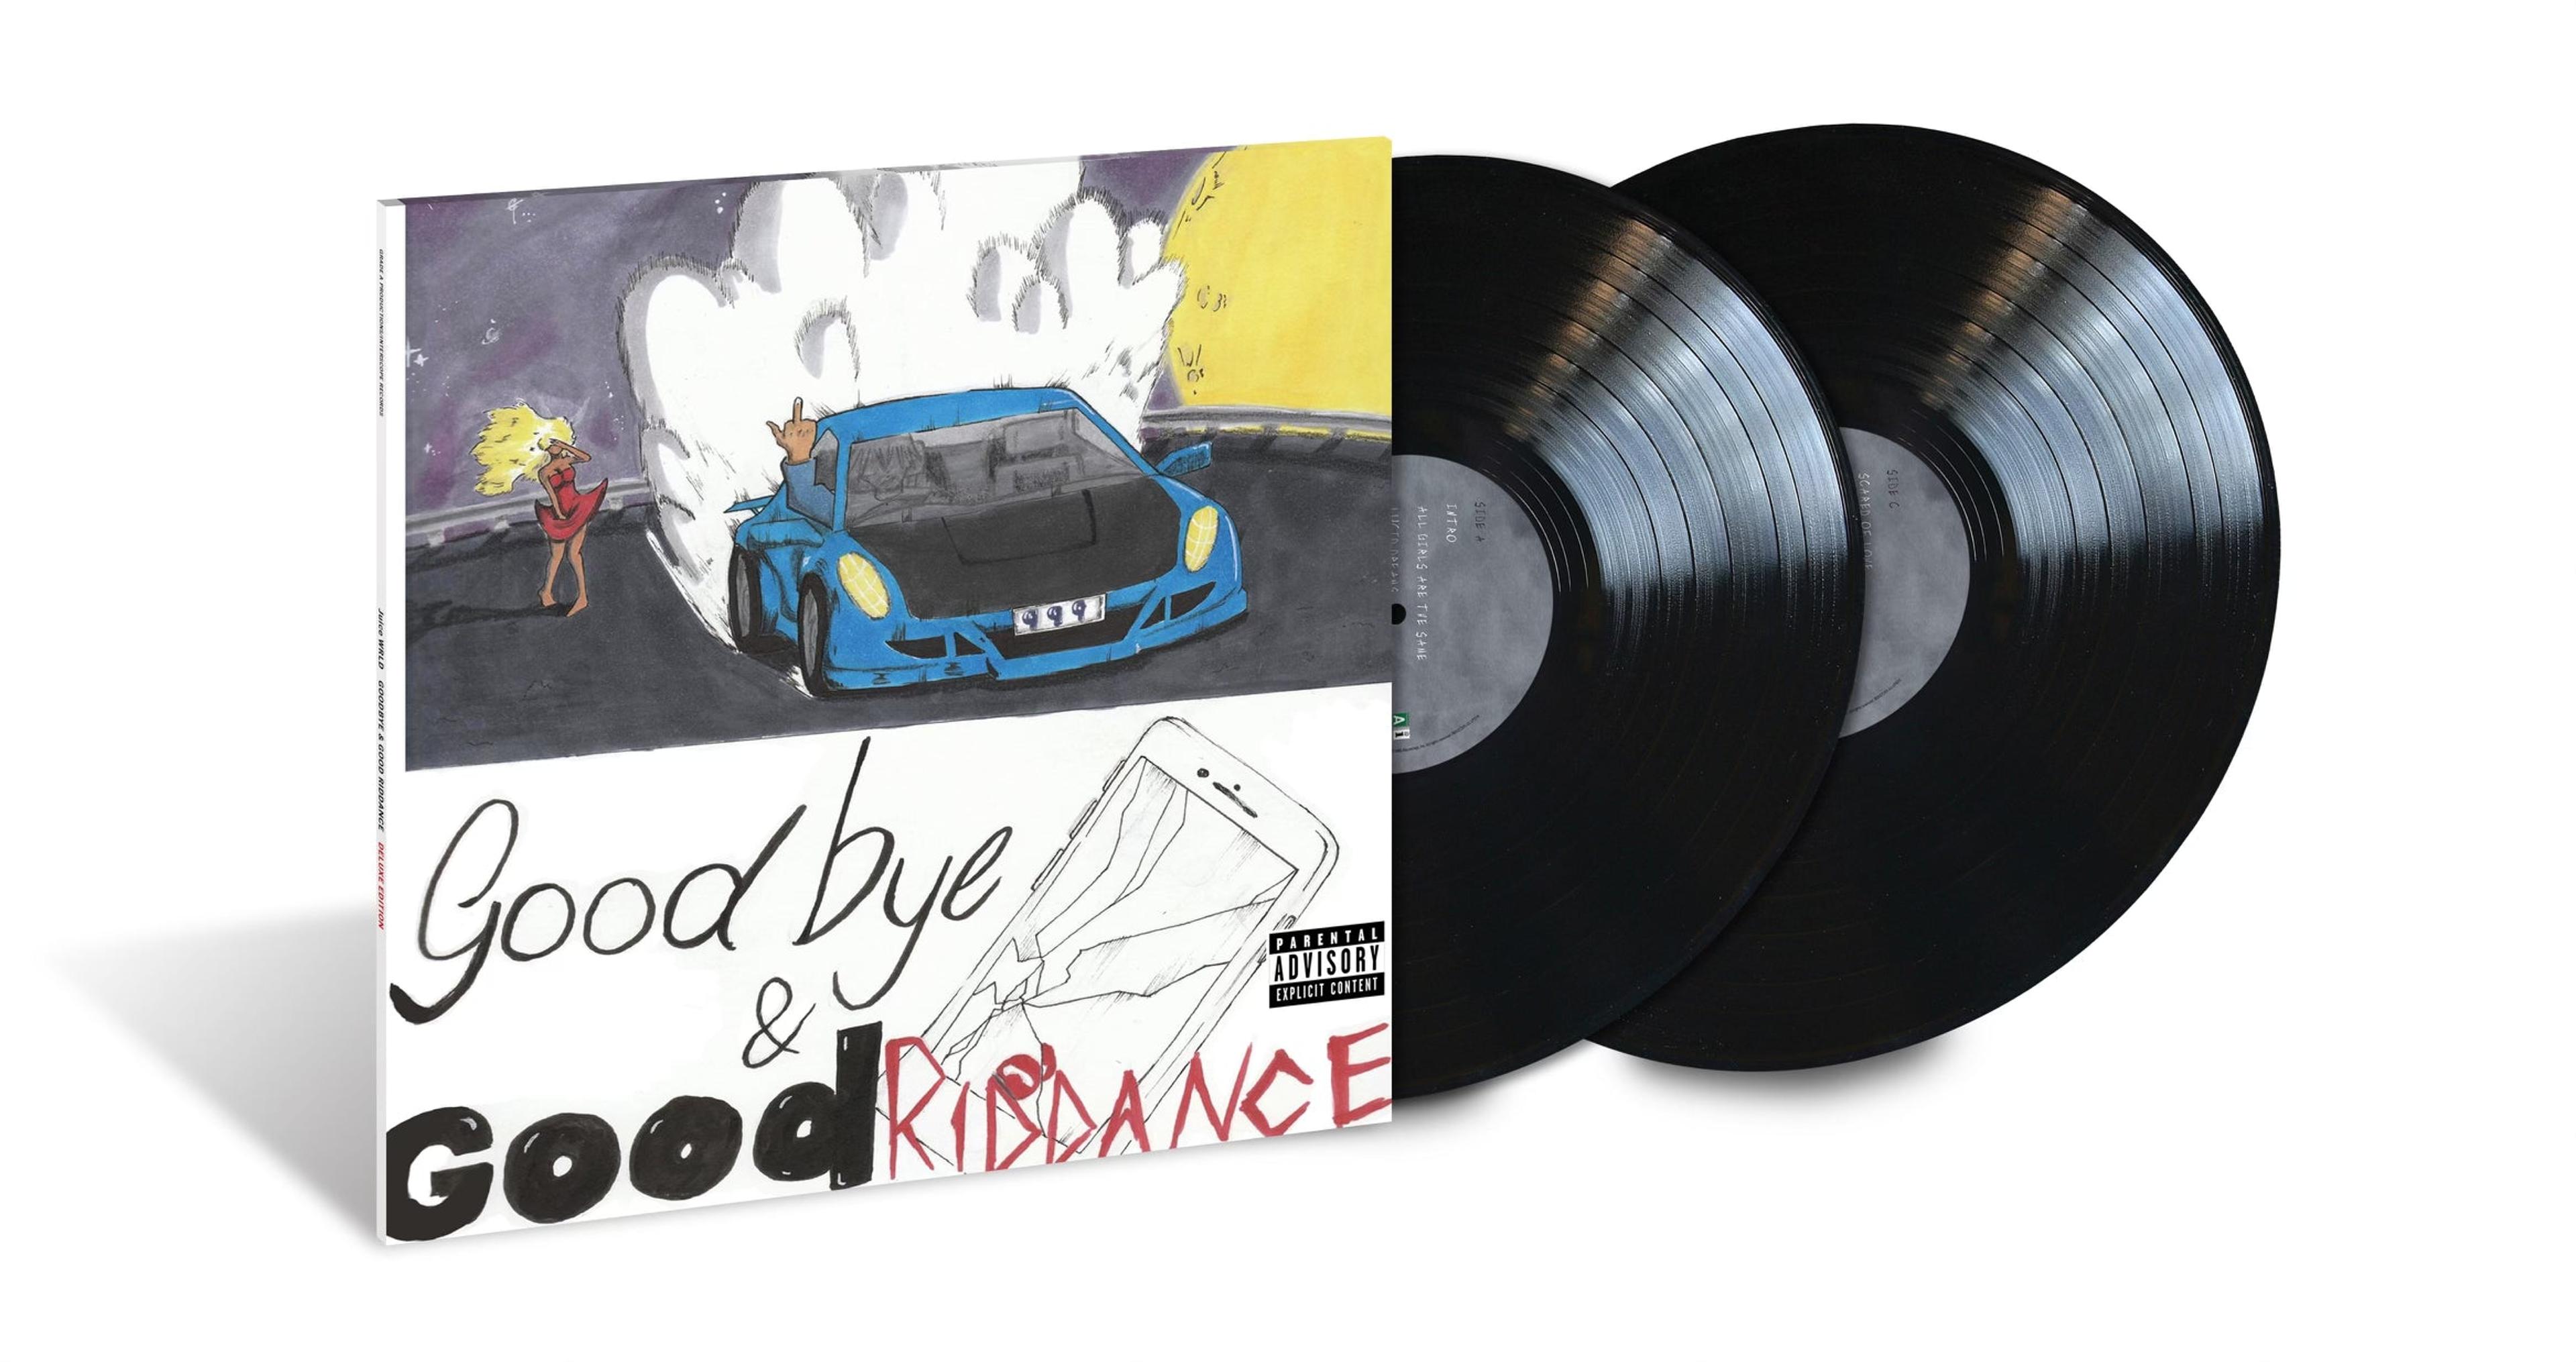 JUICE WRLD “GOODBYE GOOD RIDDANCE” LIMITED EDITION OFFICIAL 